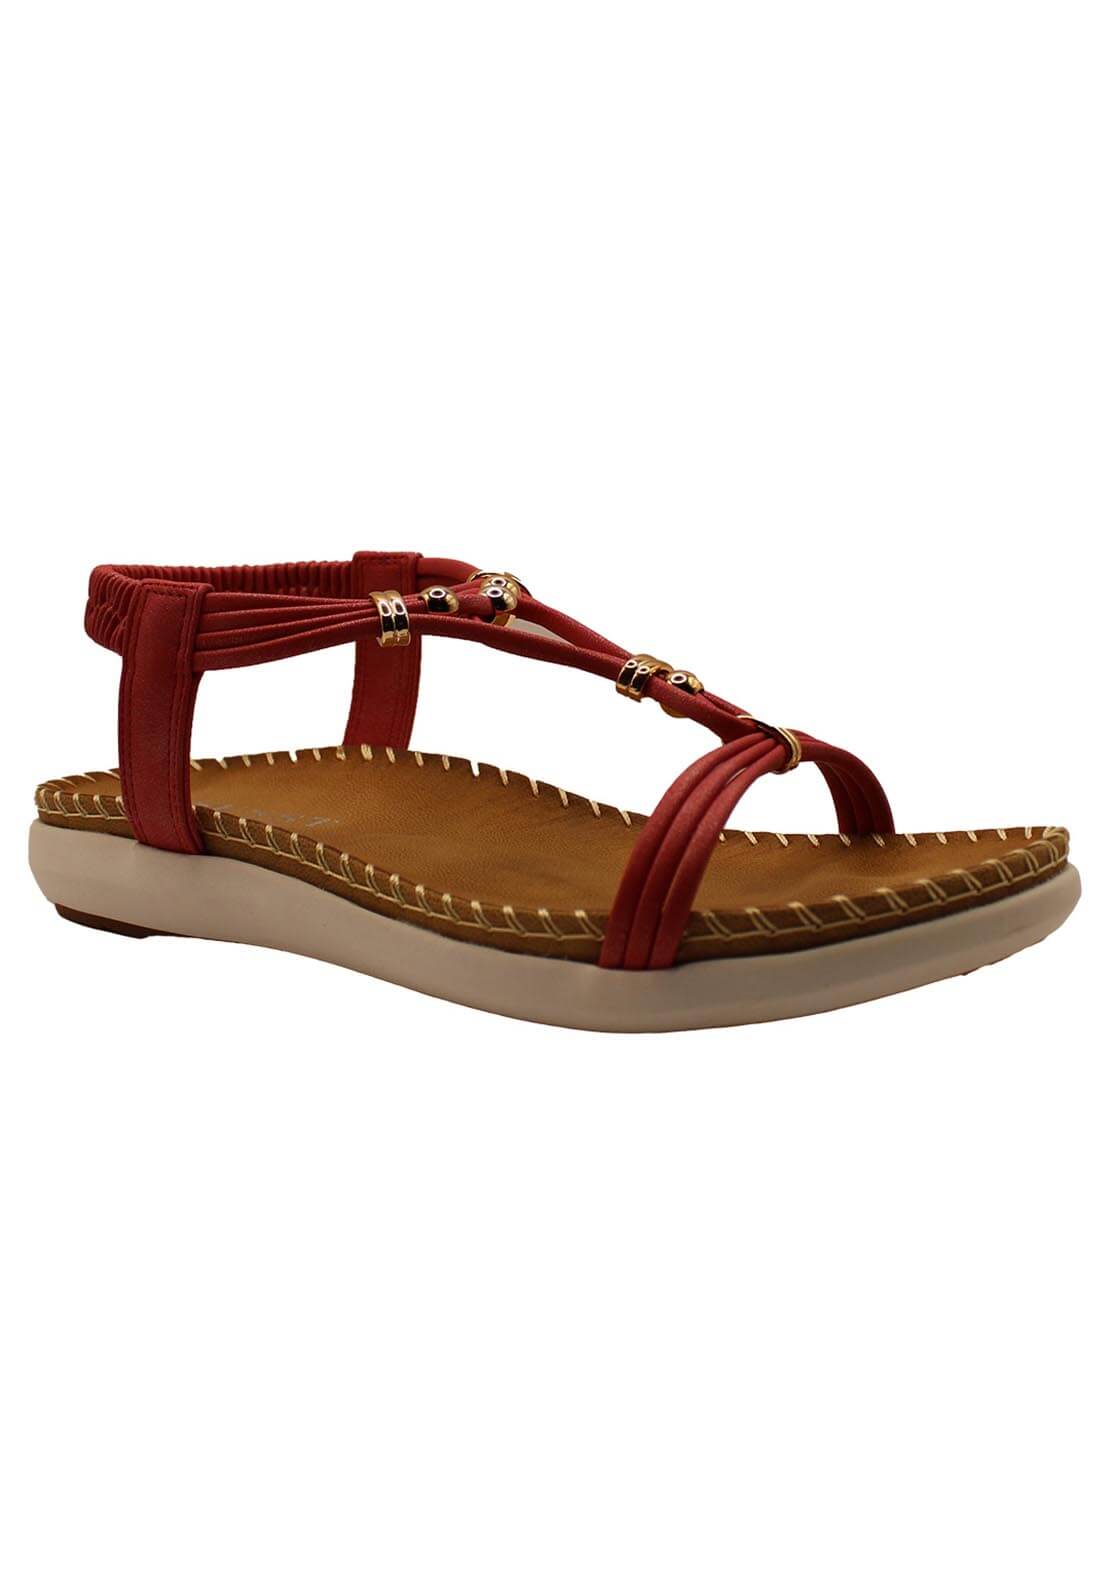 Susst Elastic Strap Sandal - Red 1 Shaws Department Stores